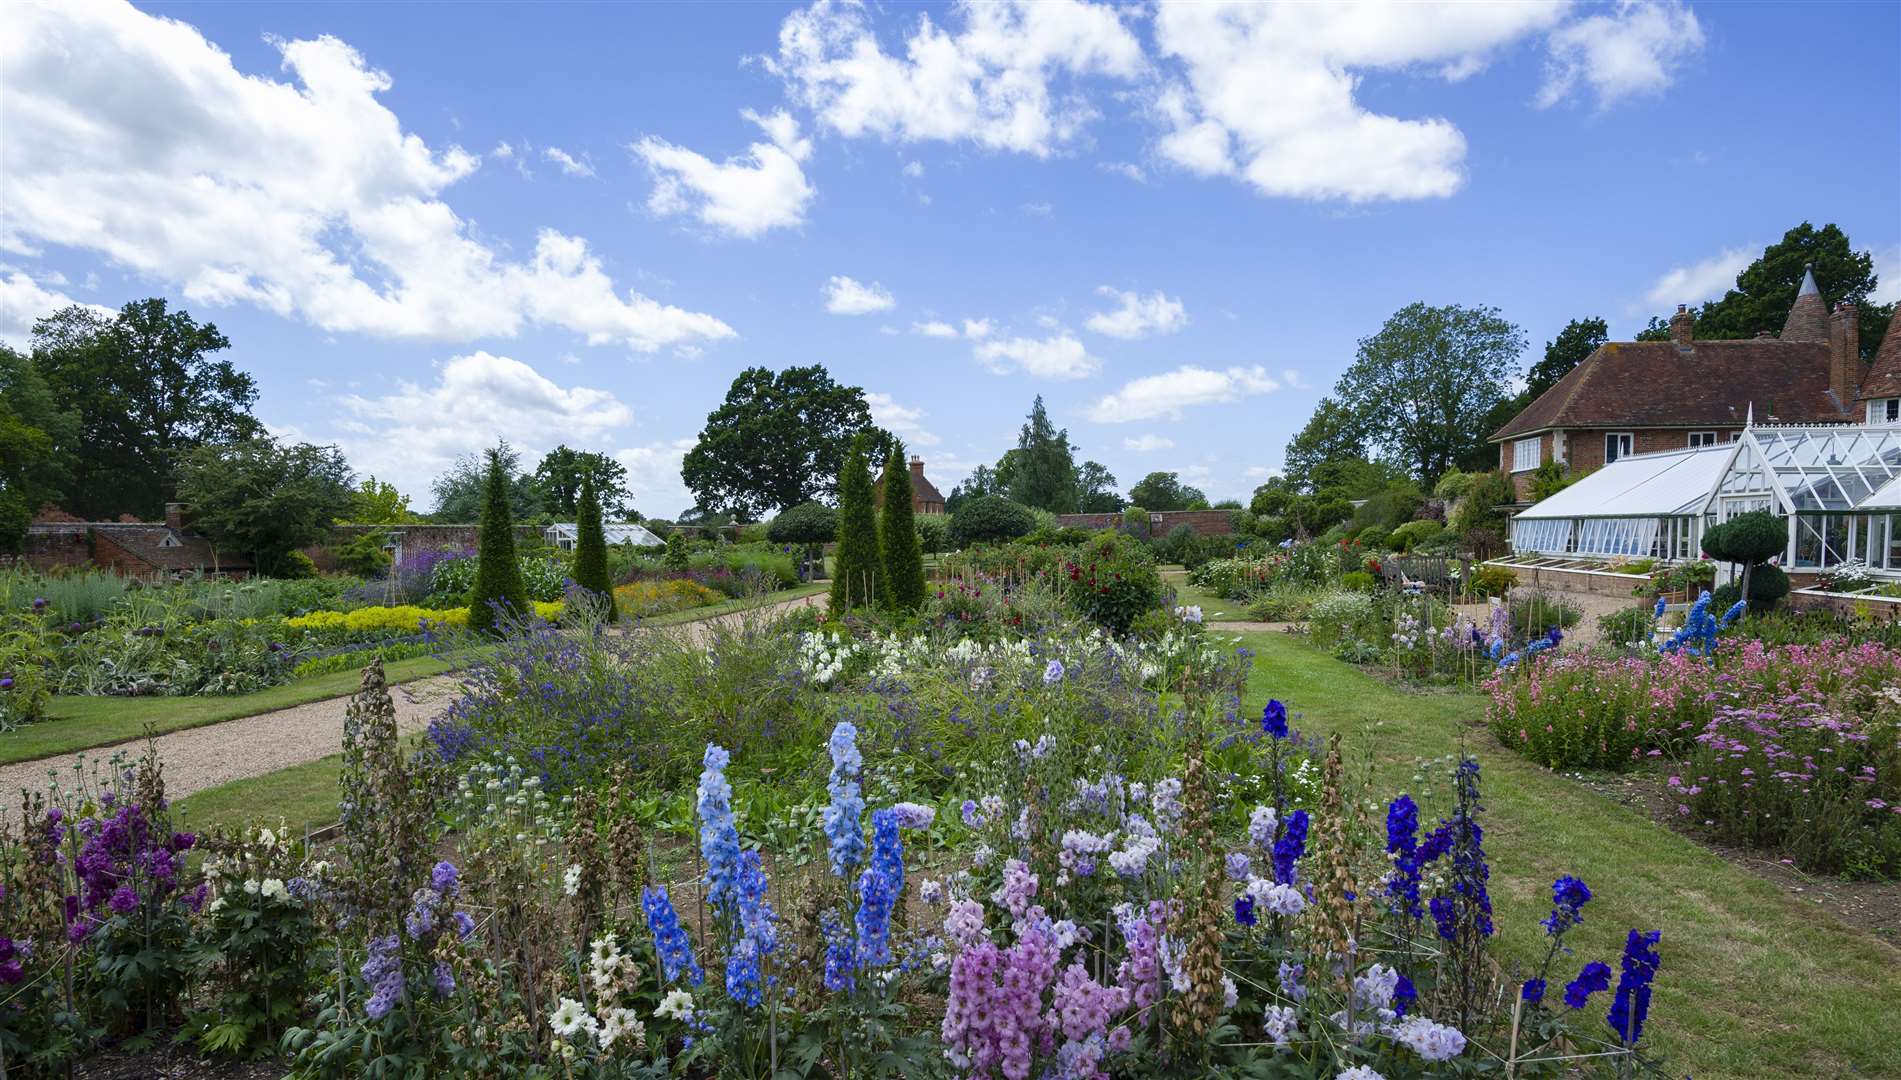 The Walled garden at Godinton is bursting with colour